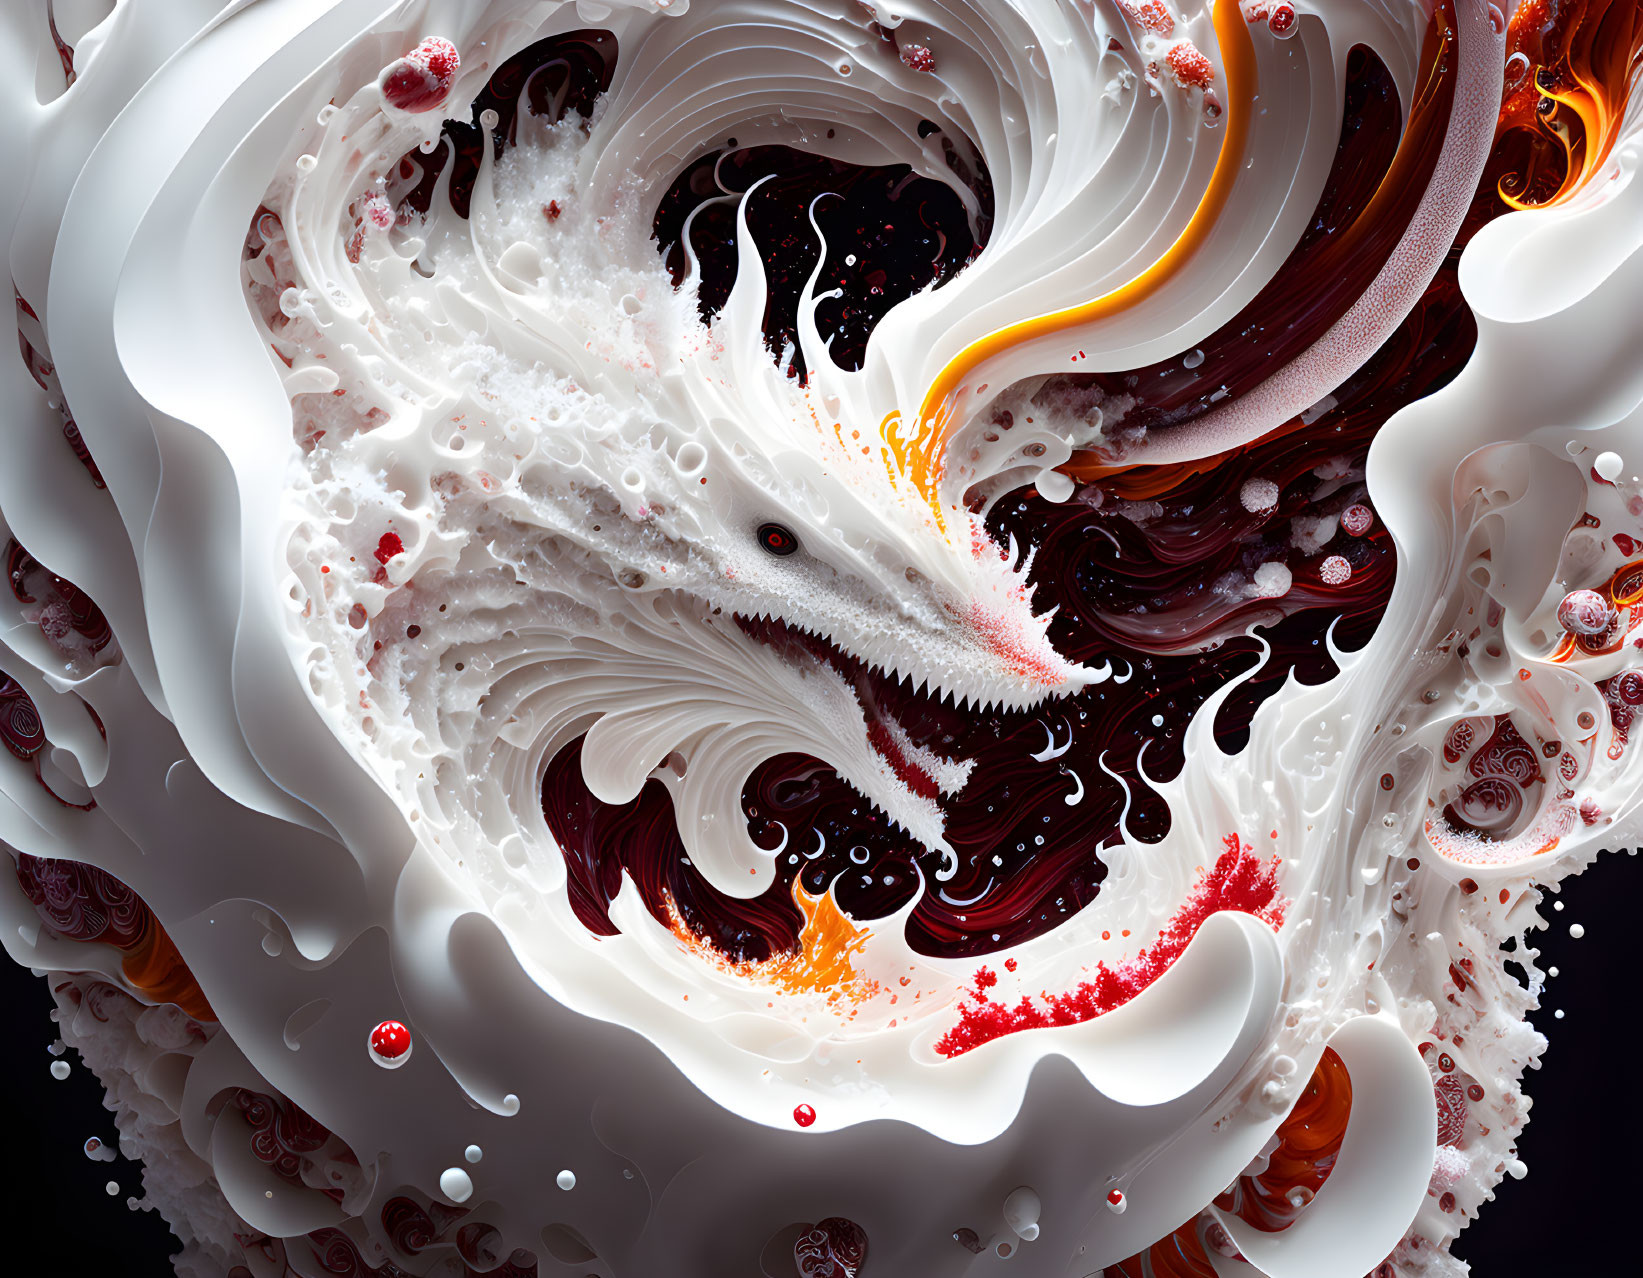 Dynamic Swirling Abstract Art in Creamy White, Deep Red, and Brown Hues